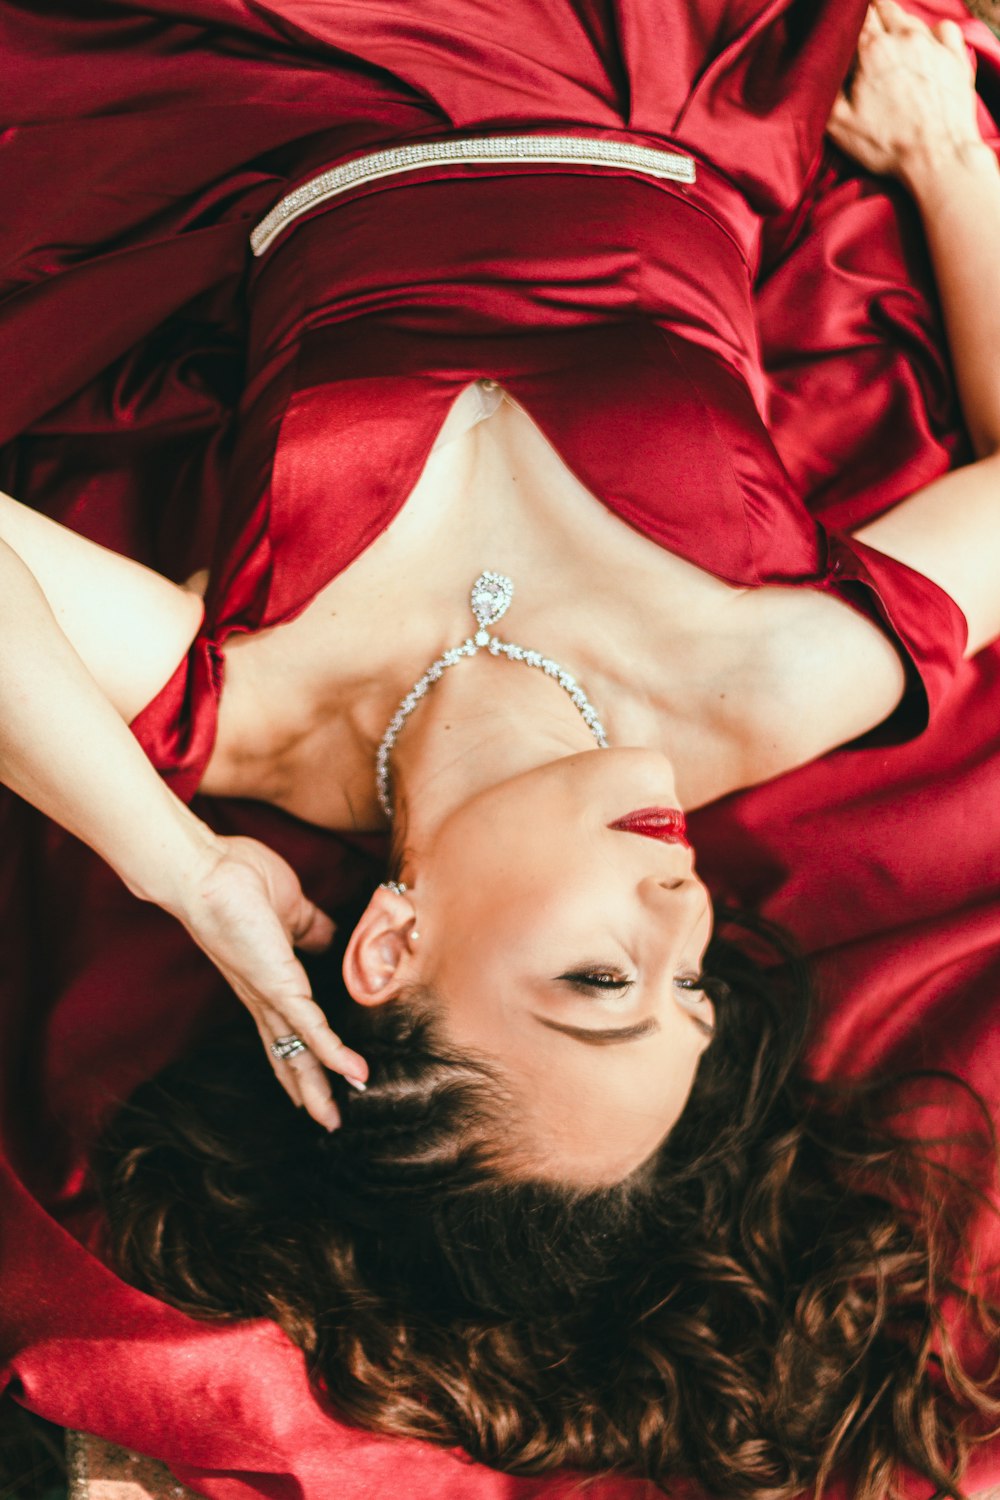 woman in red dress lying on red textile